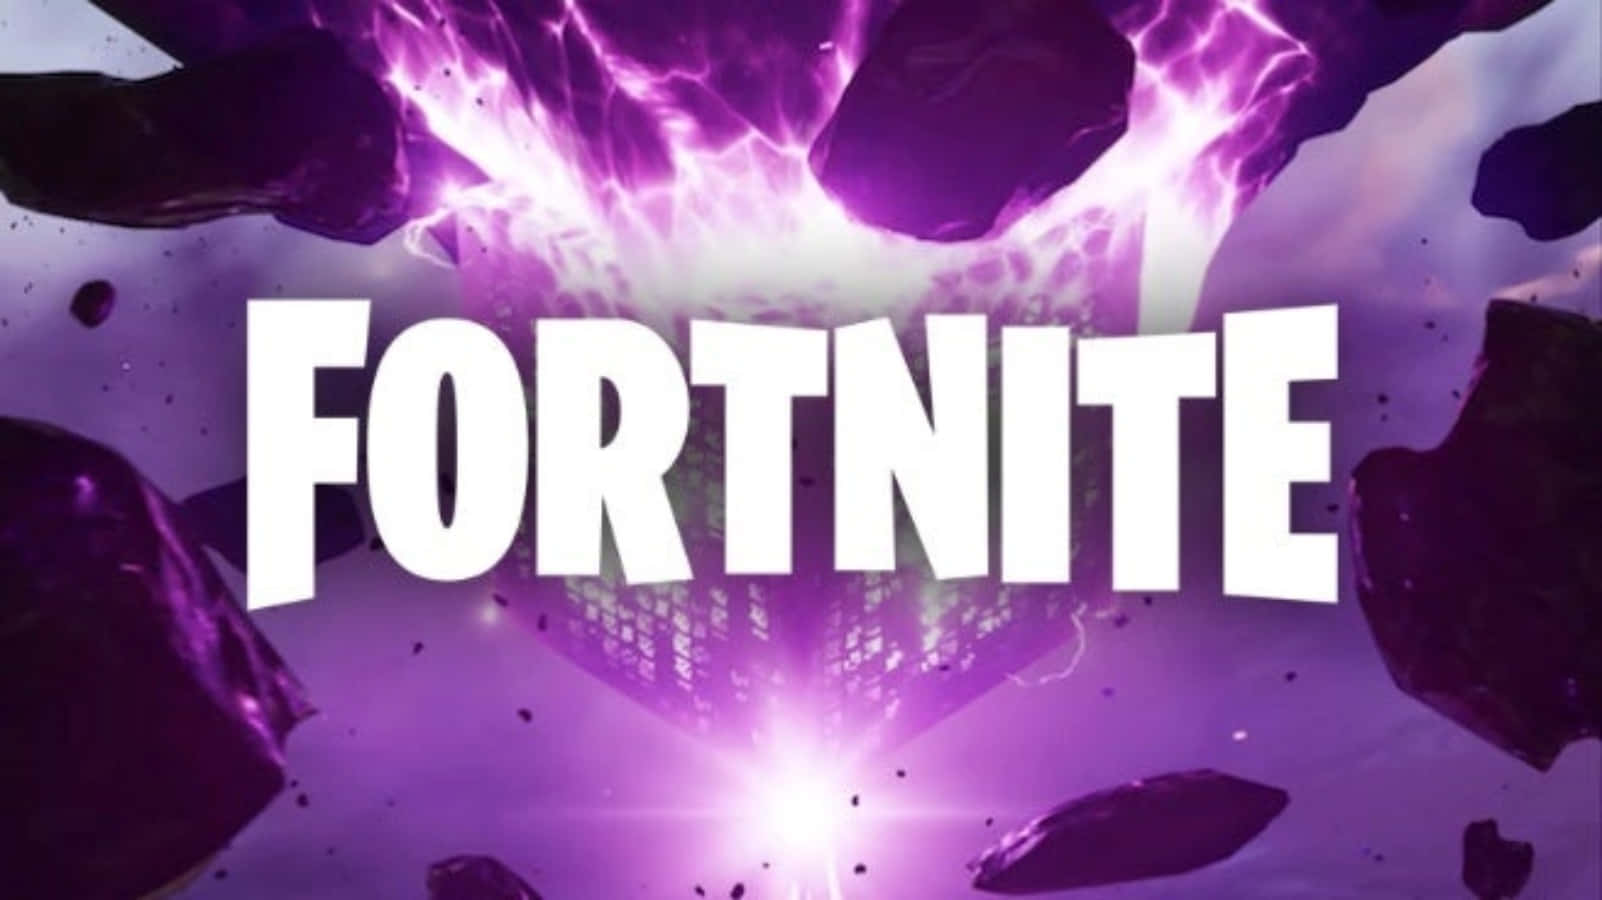 Download wallpapers Fortnite violet logo 4k violet brickwall Fortnite  logo 2020 games Fortnite neon logo Fortnite for desktop with resolution  3840x2400 High Quality HD pictures wallpapers